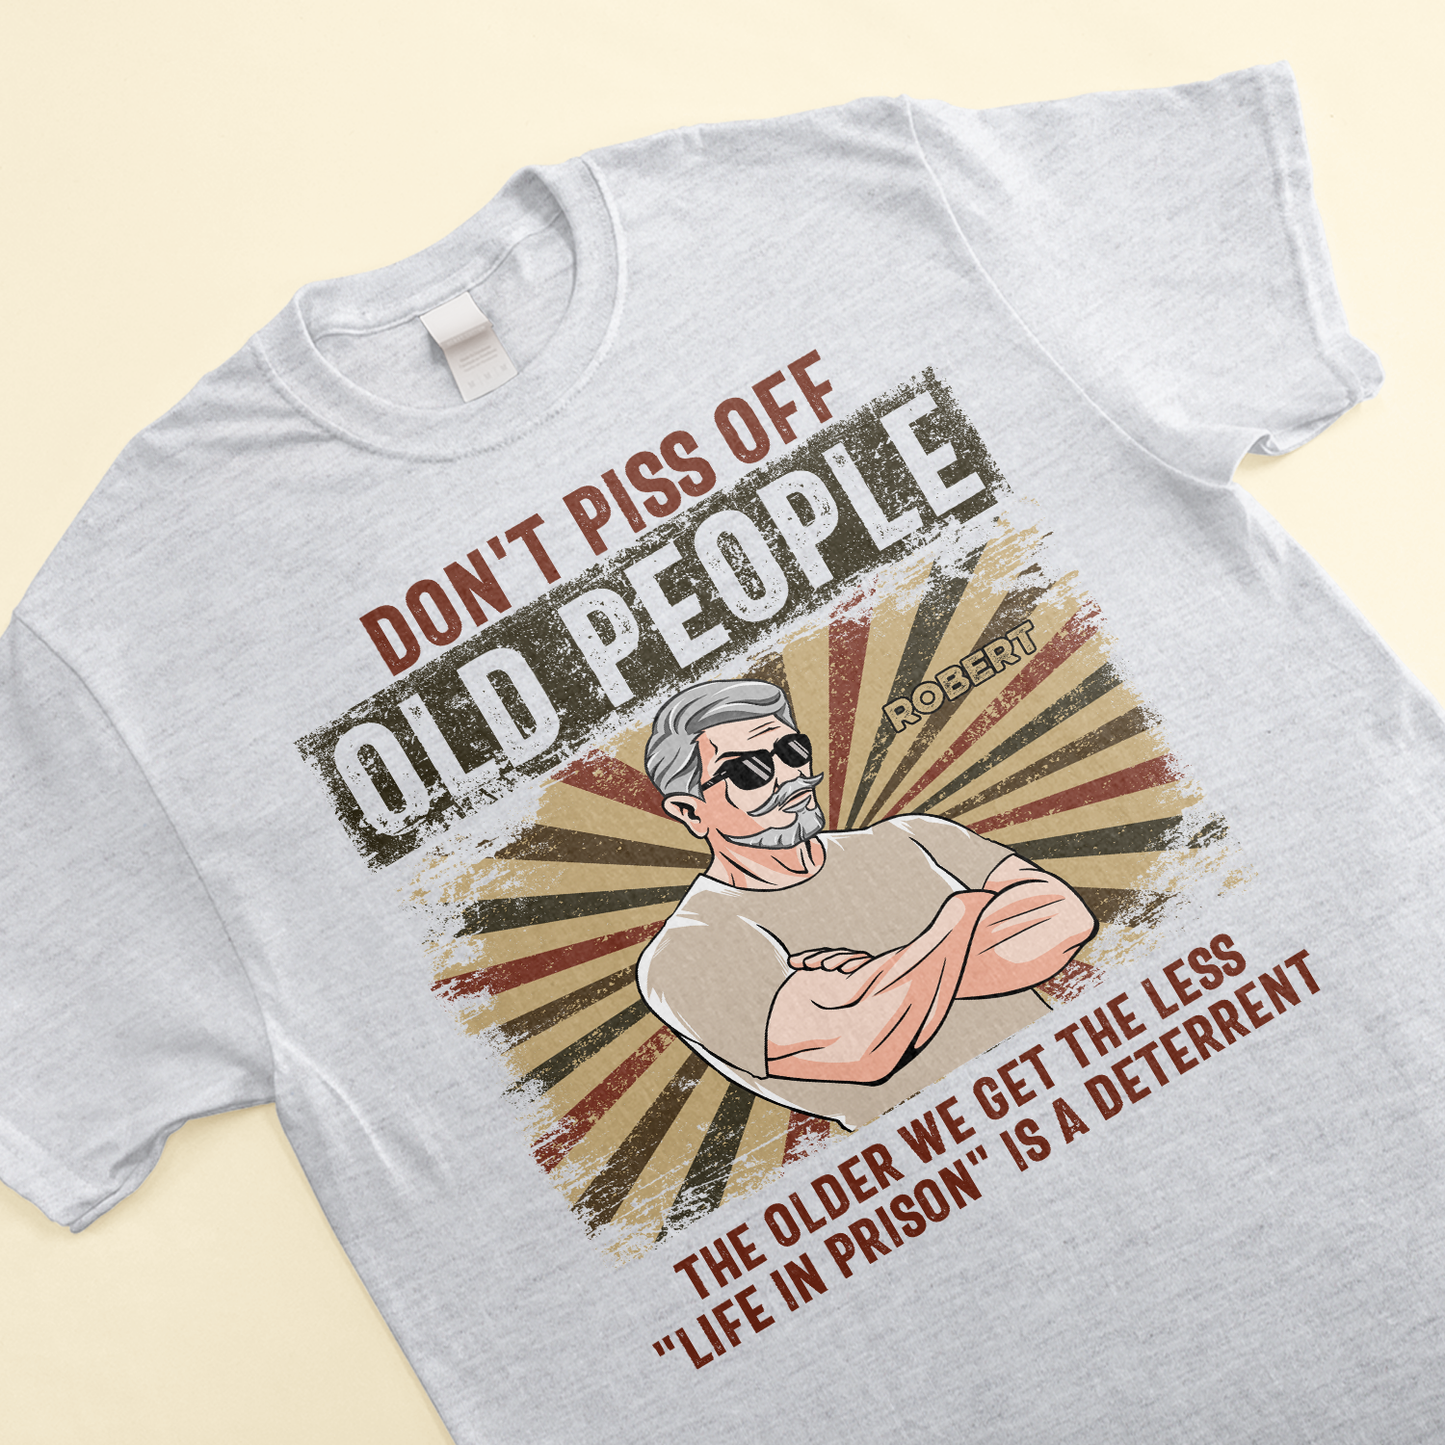 Don't Piss Off Old People - Personalized Shirt - Father's Day, Birthday Gift For Grandpa, Old Men, Retirement